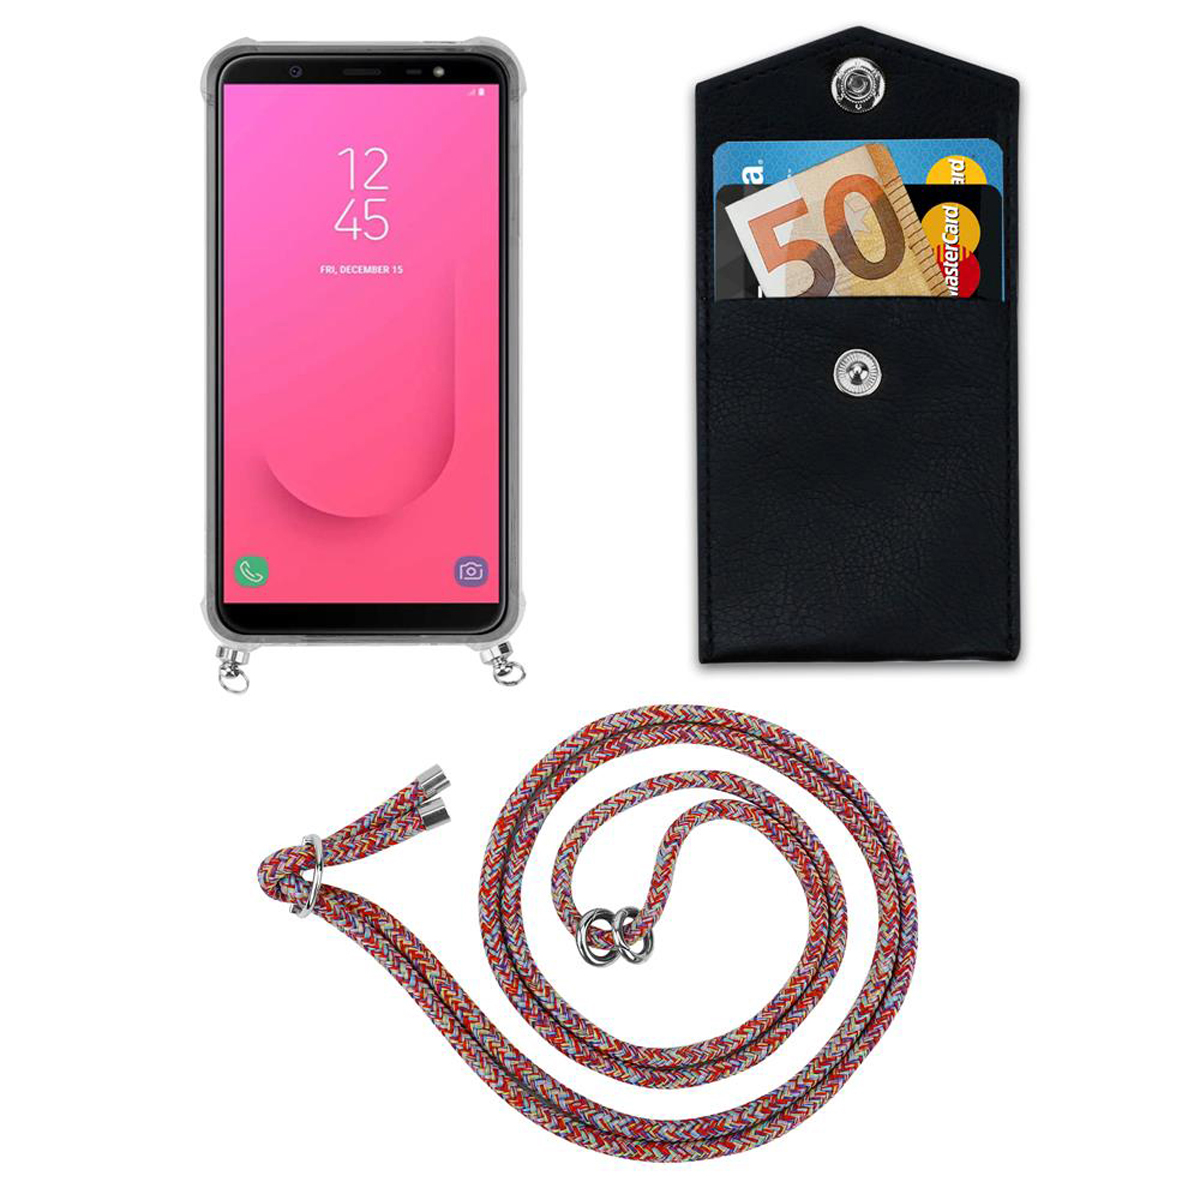 COLORFUL 2018, Silber Samsung, Kordel Ringen, PARROT und A6 Galaxy abnehmbarer Band Backcover, Hülle, Handy CADORABO PLUS Kette mit